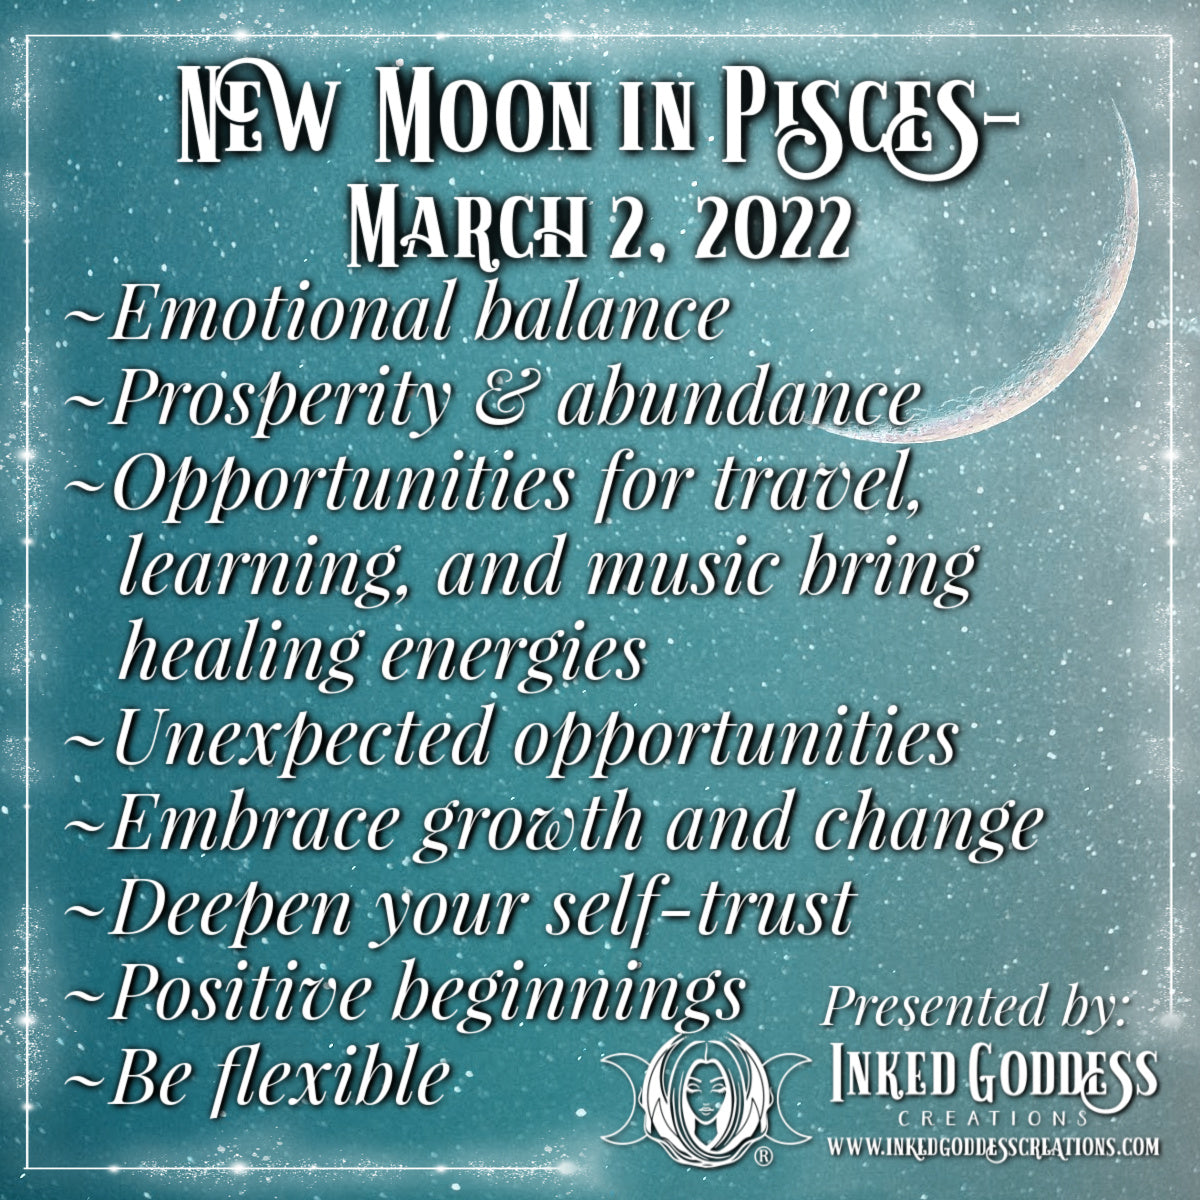 New Moon in Pisces- March 2, 2022